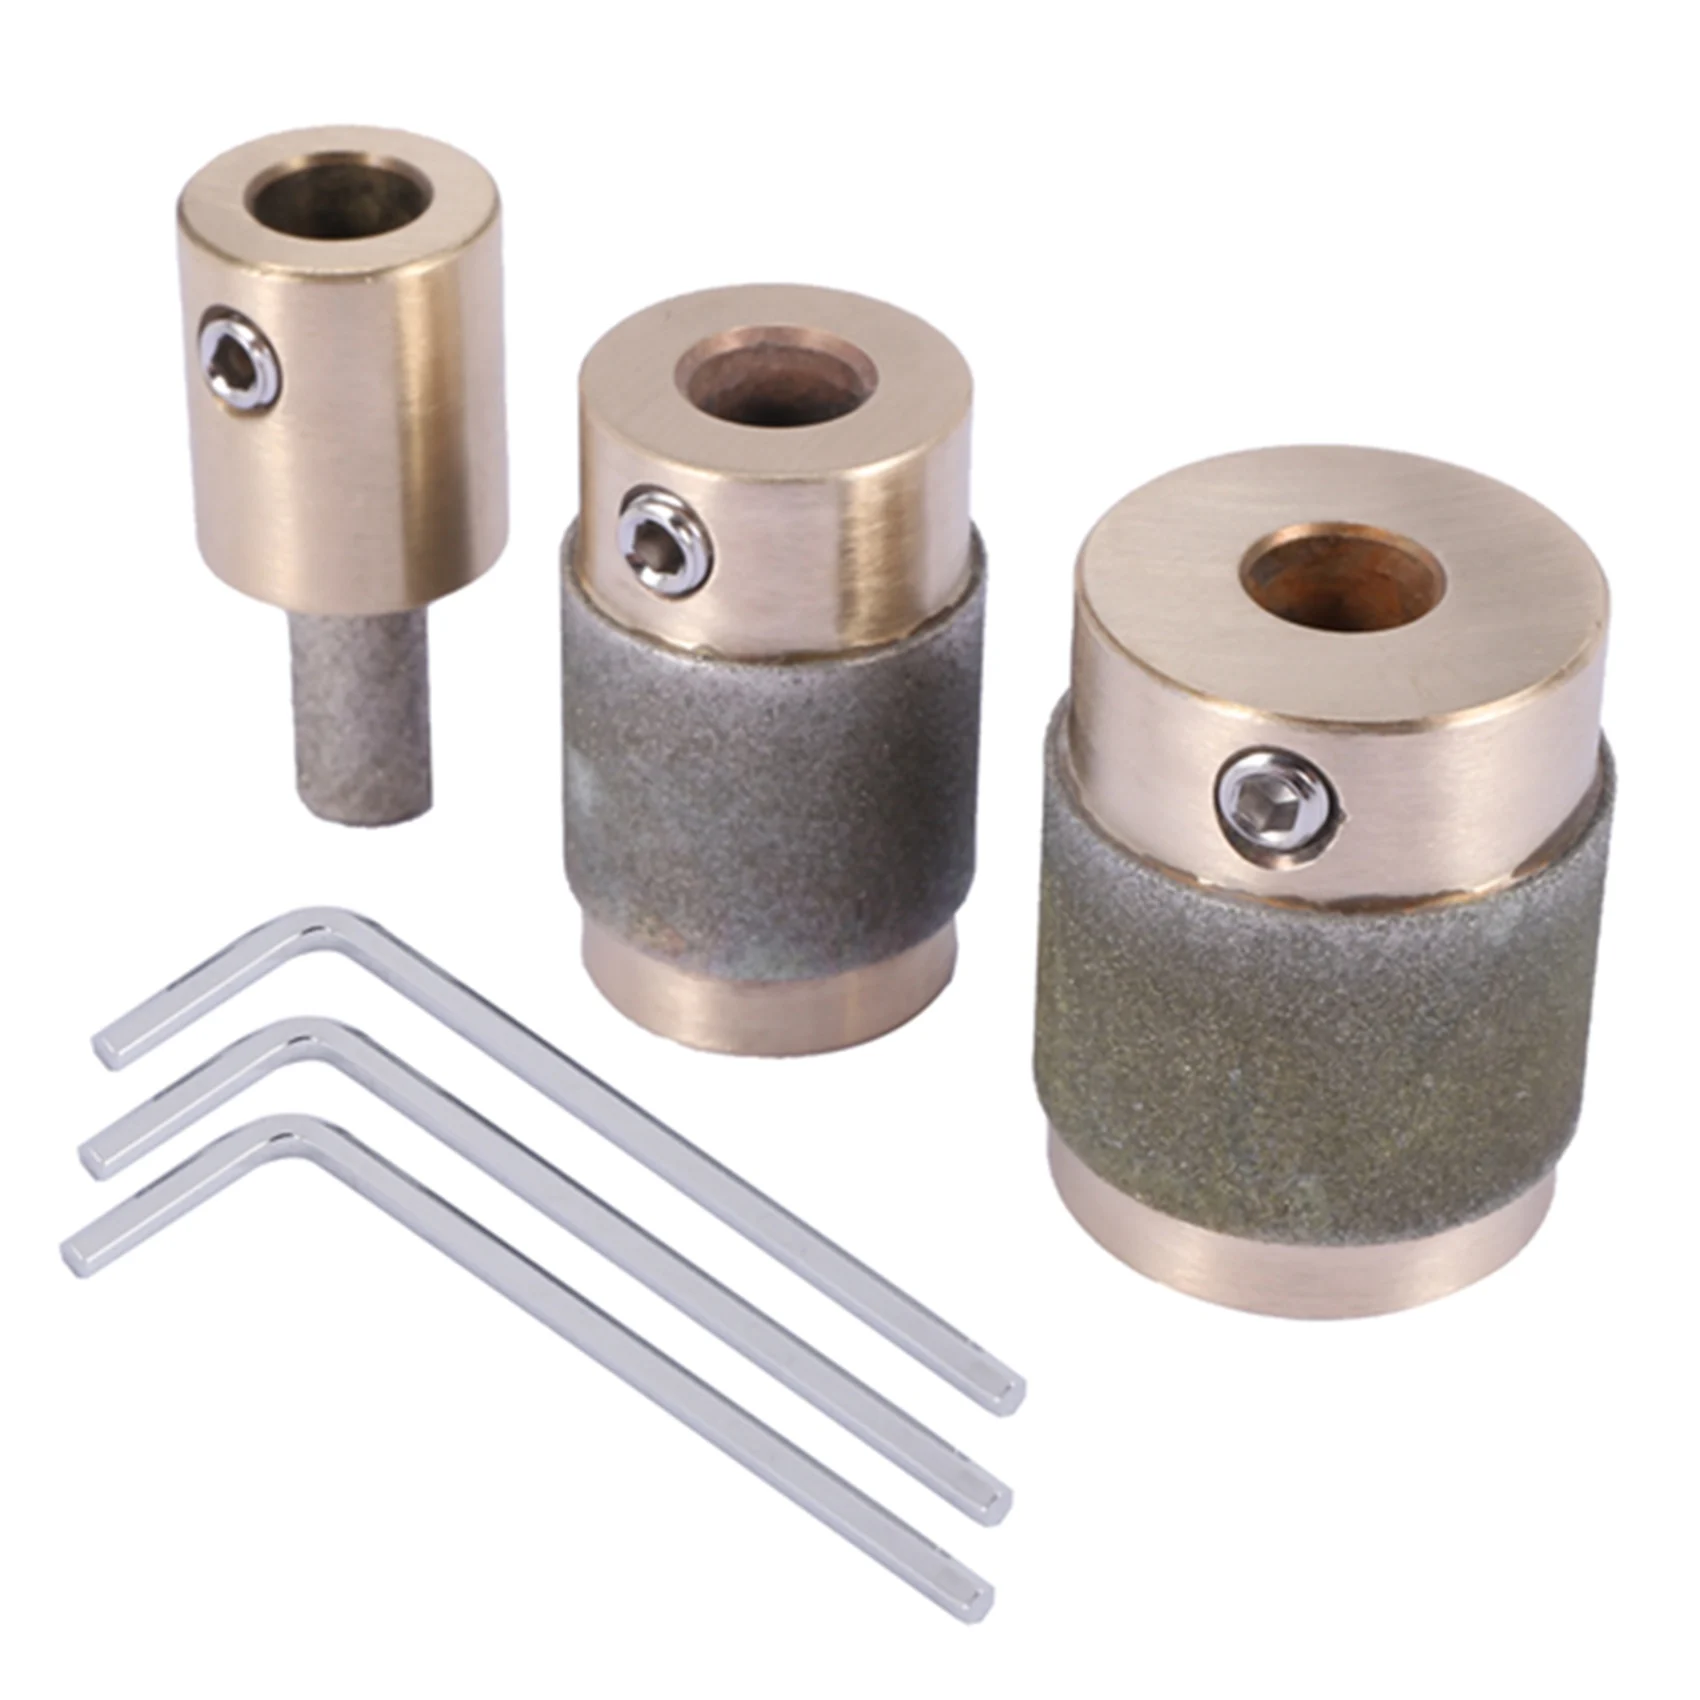 

3Pcs Grinder Head 1 Inch 3/4 Inch 1/4 Inch Brass Core Standard Grit Stained Glass Grinder Bit Head for Glass Stone